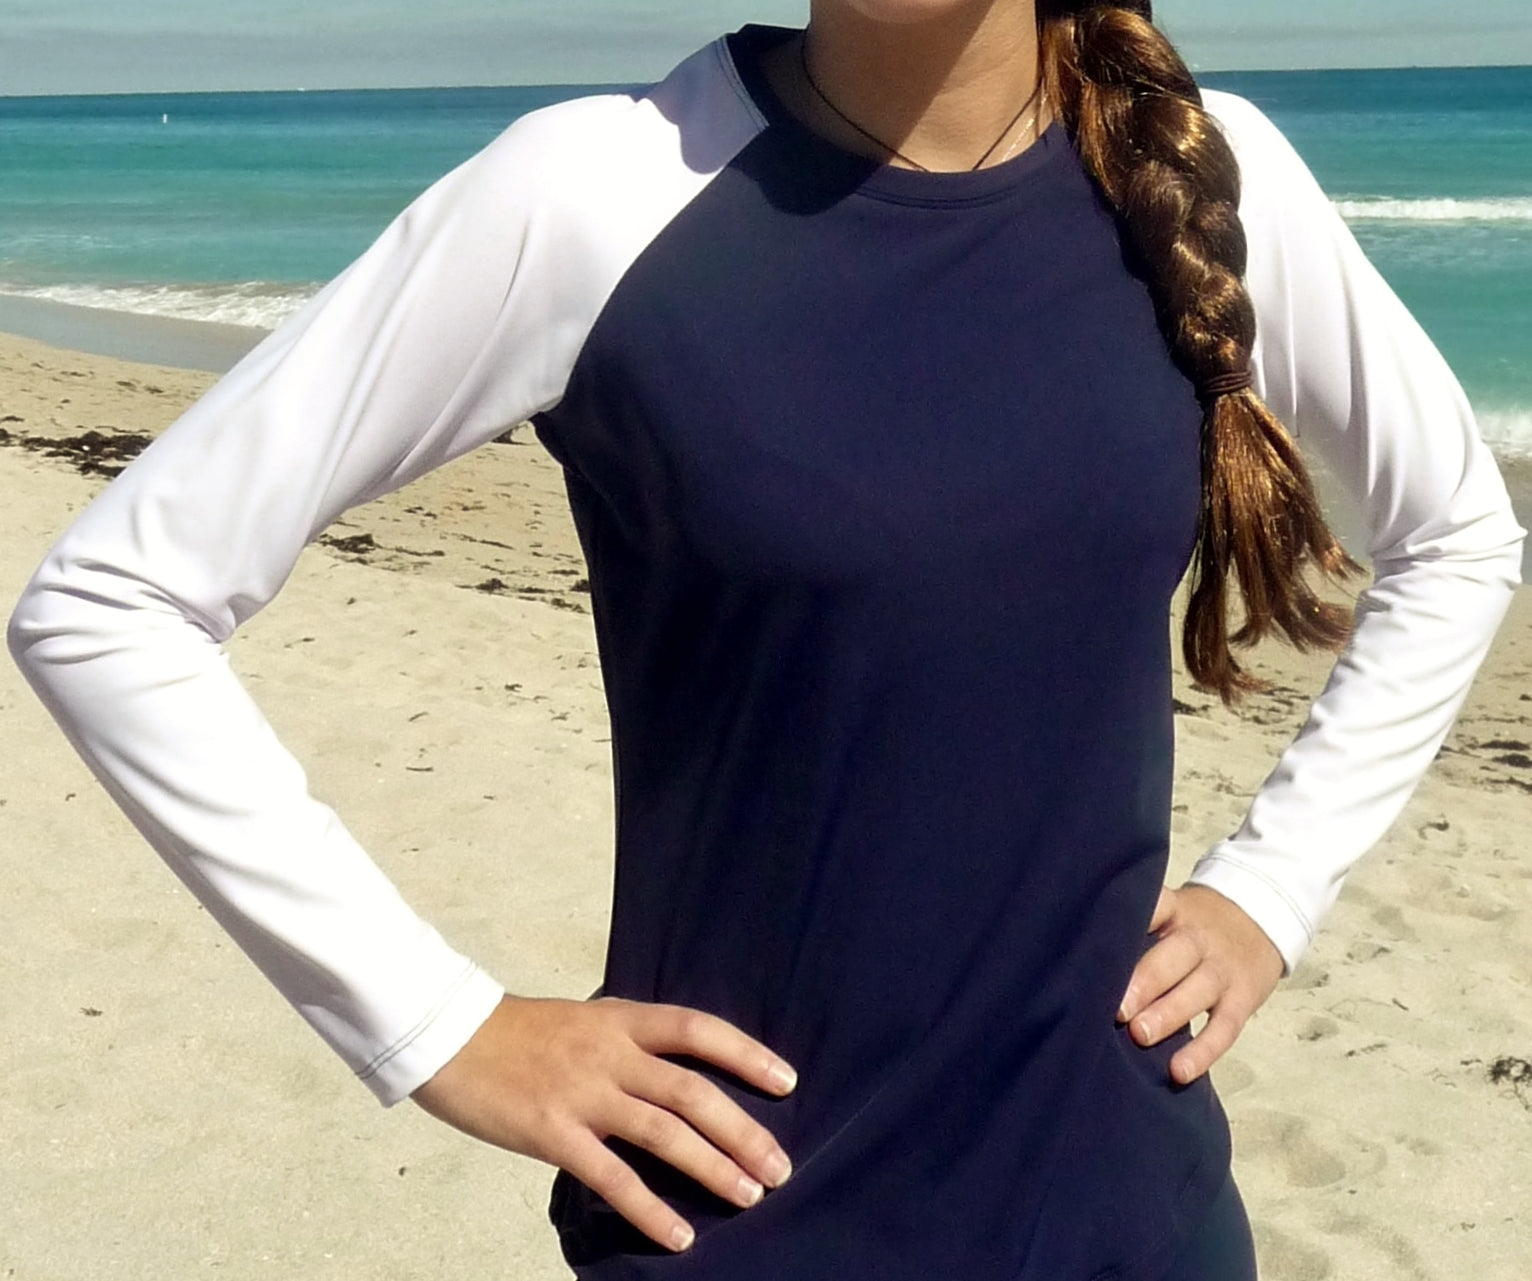 Women's modest swim top in solid navy with white sleeves.